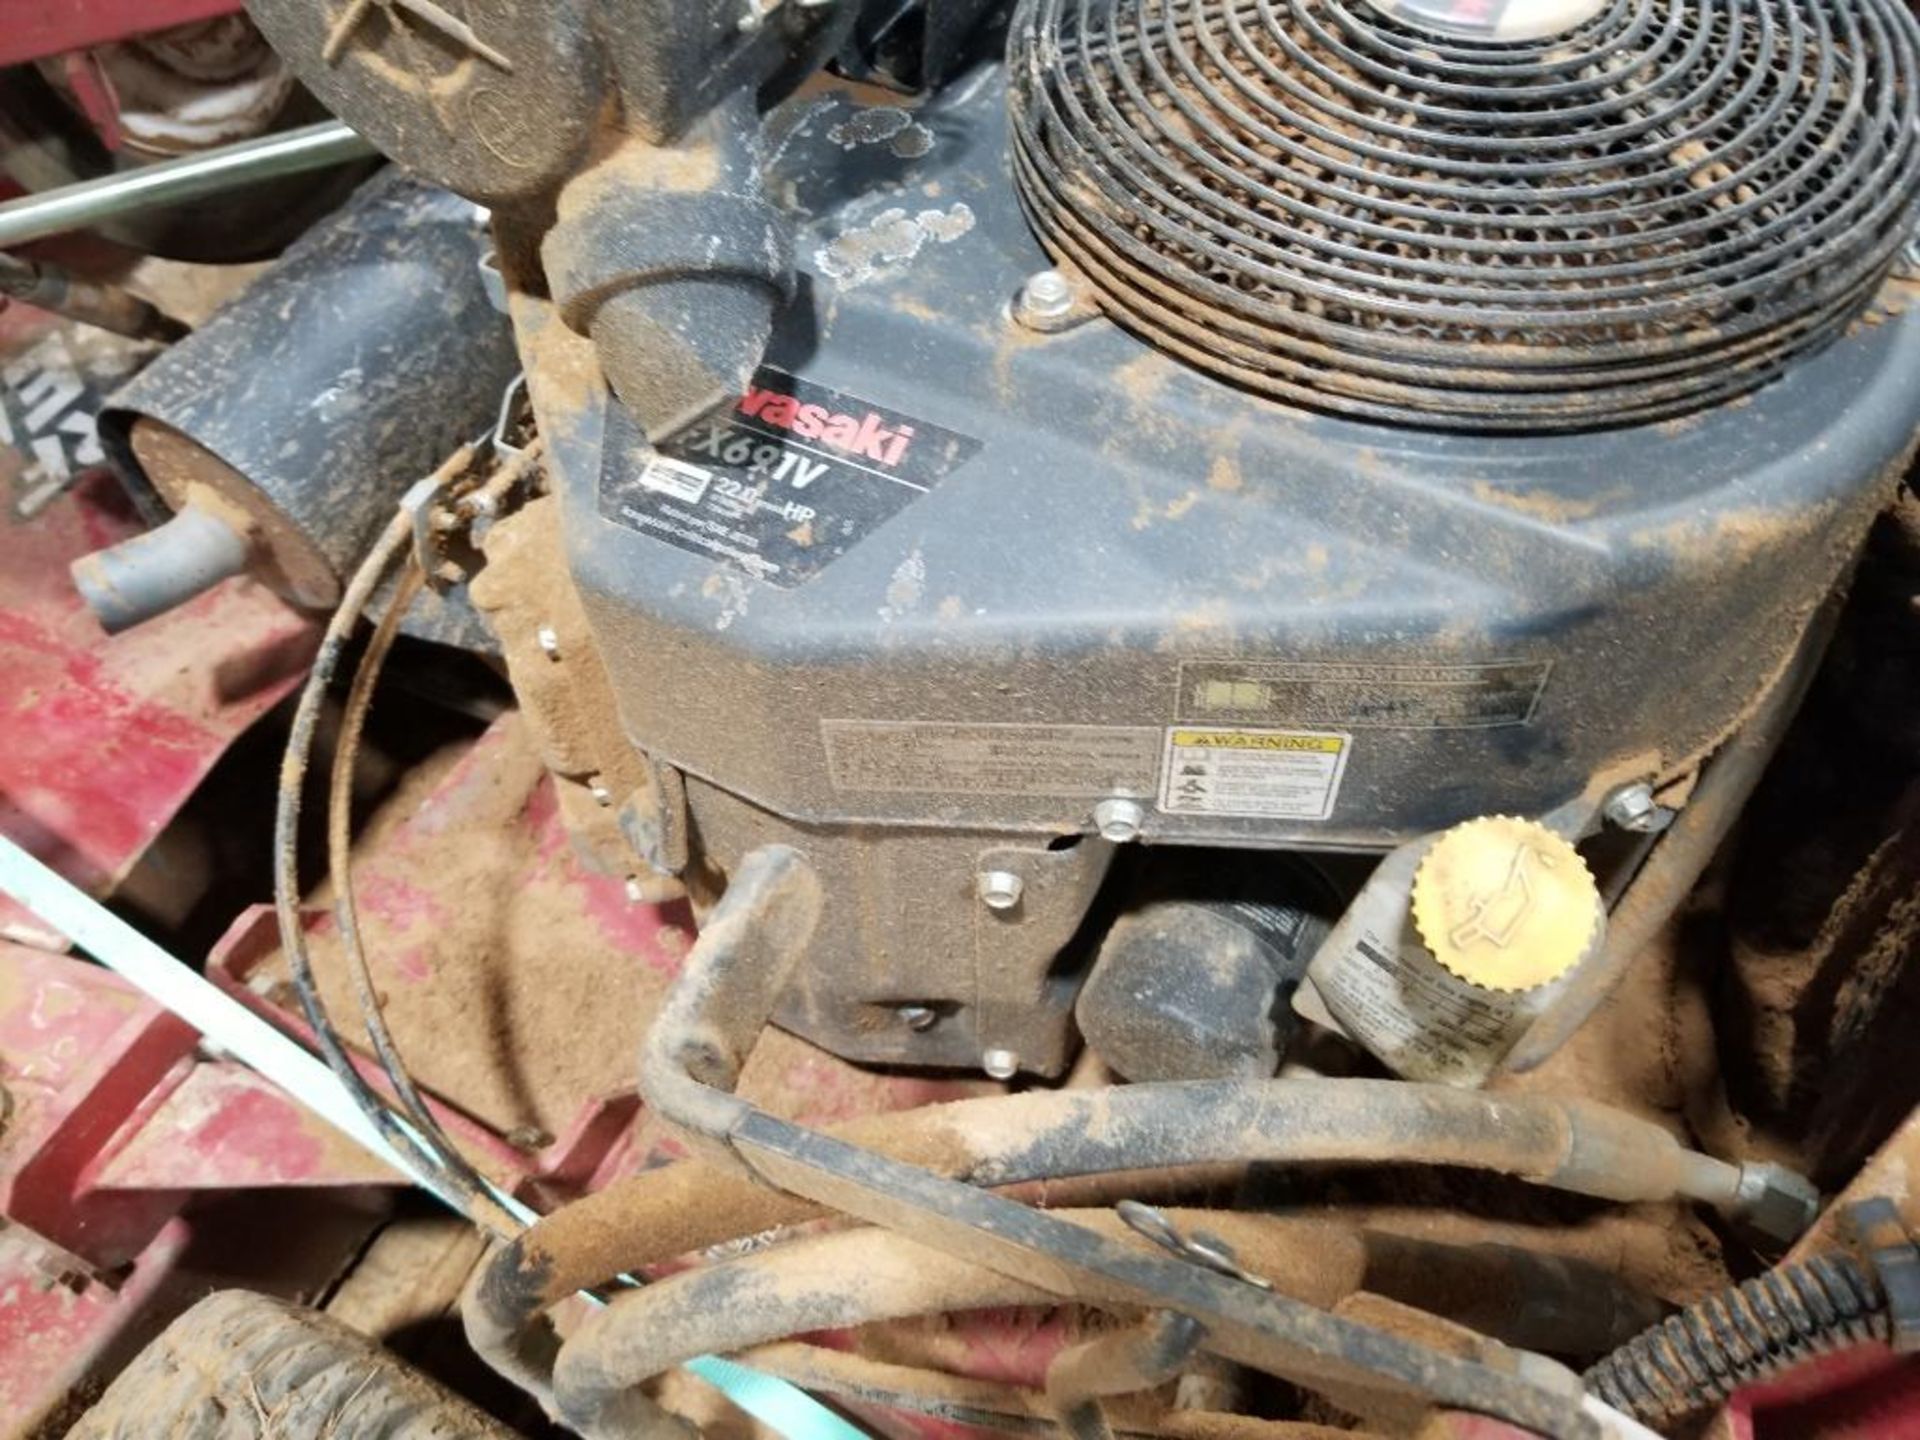 60in Exmark walk behind mower. Kawasaki 22hp engine. Working condition unknown. Battery is dead. - Image 11 of 20